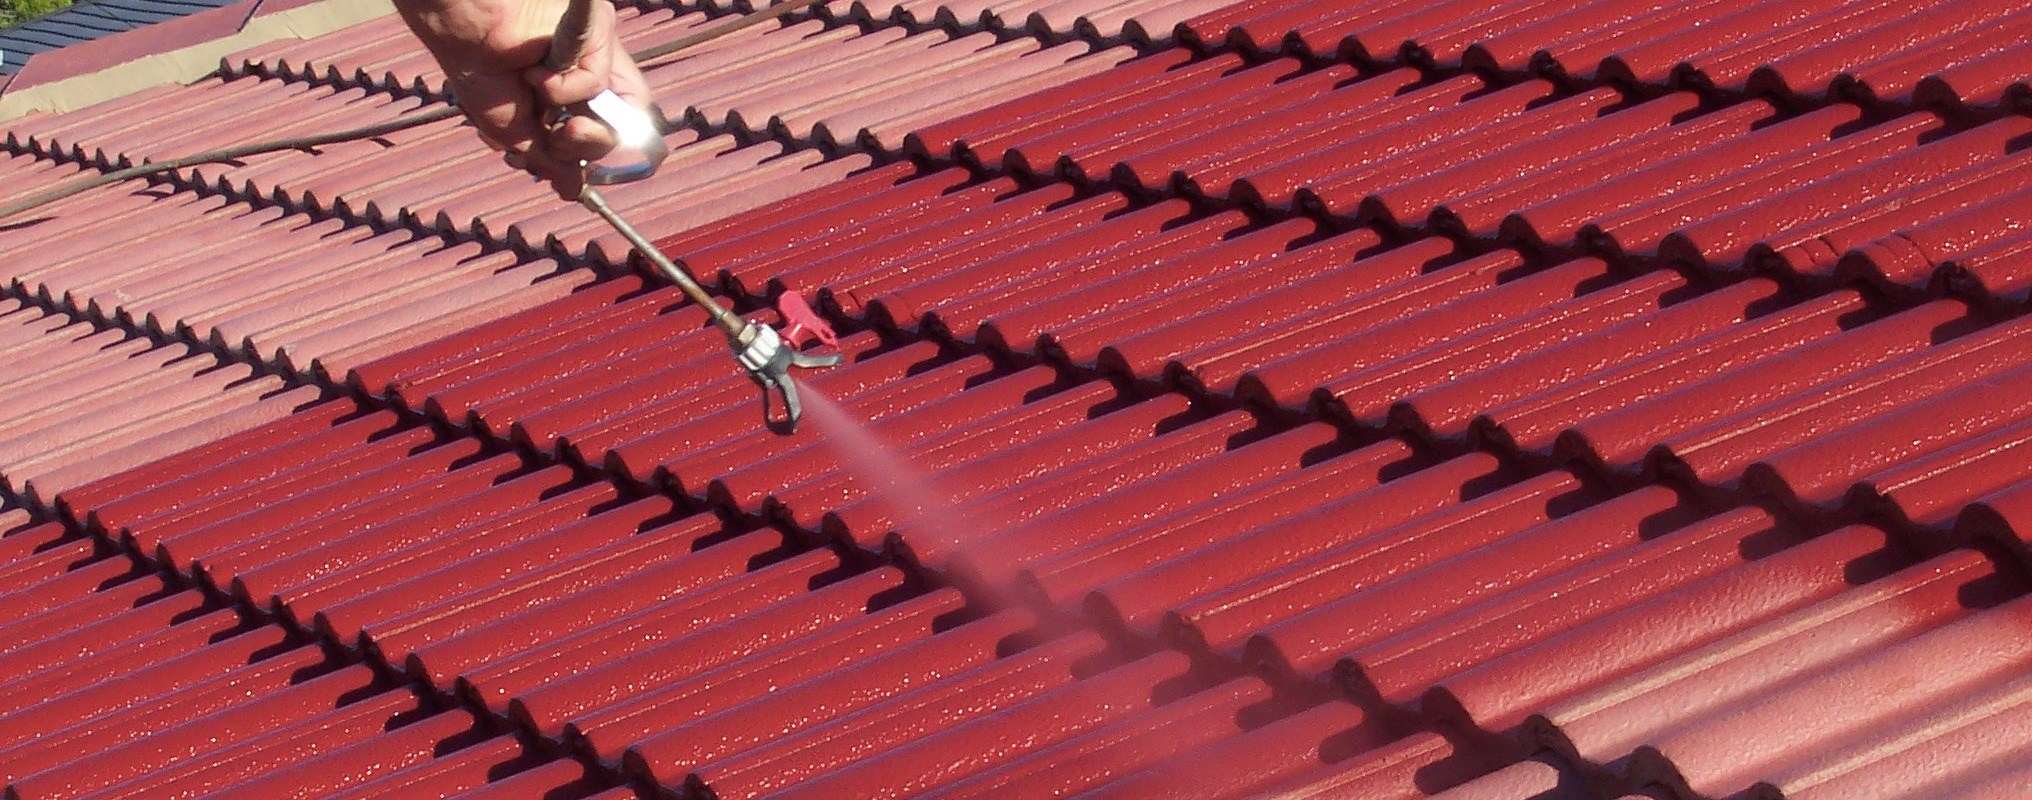 Roof Paint Being Applied With Spray